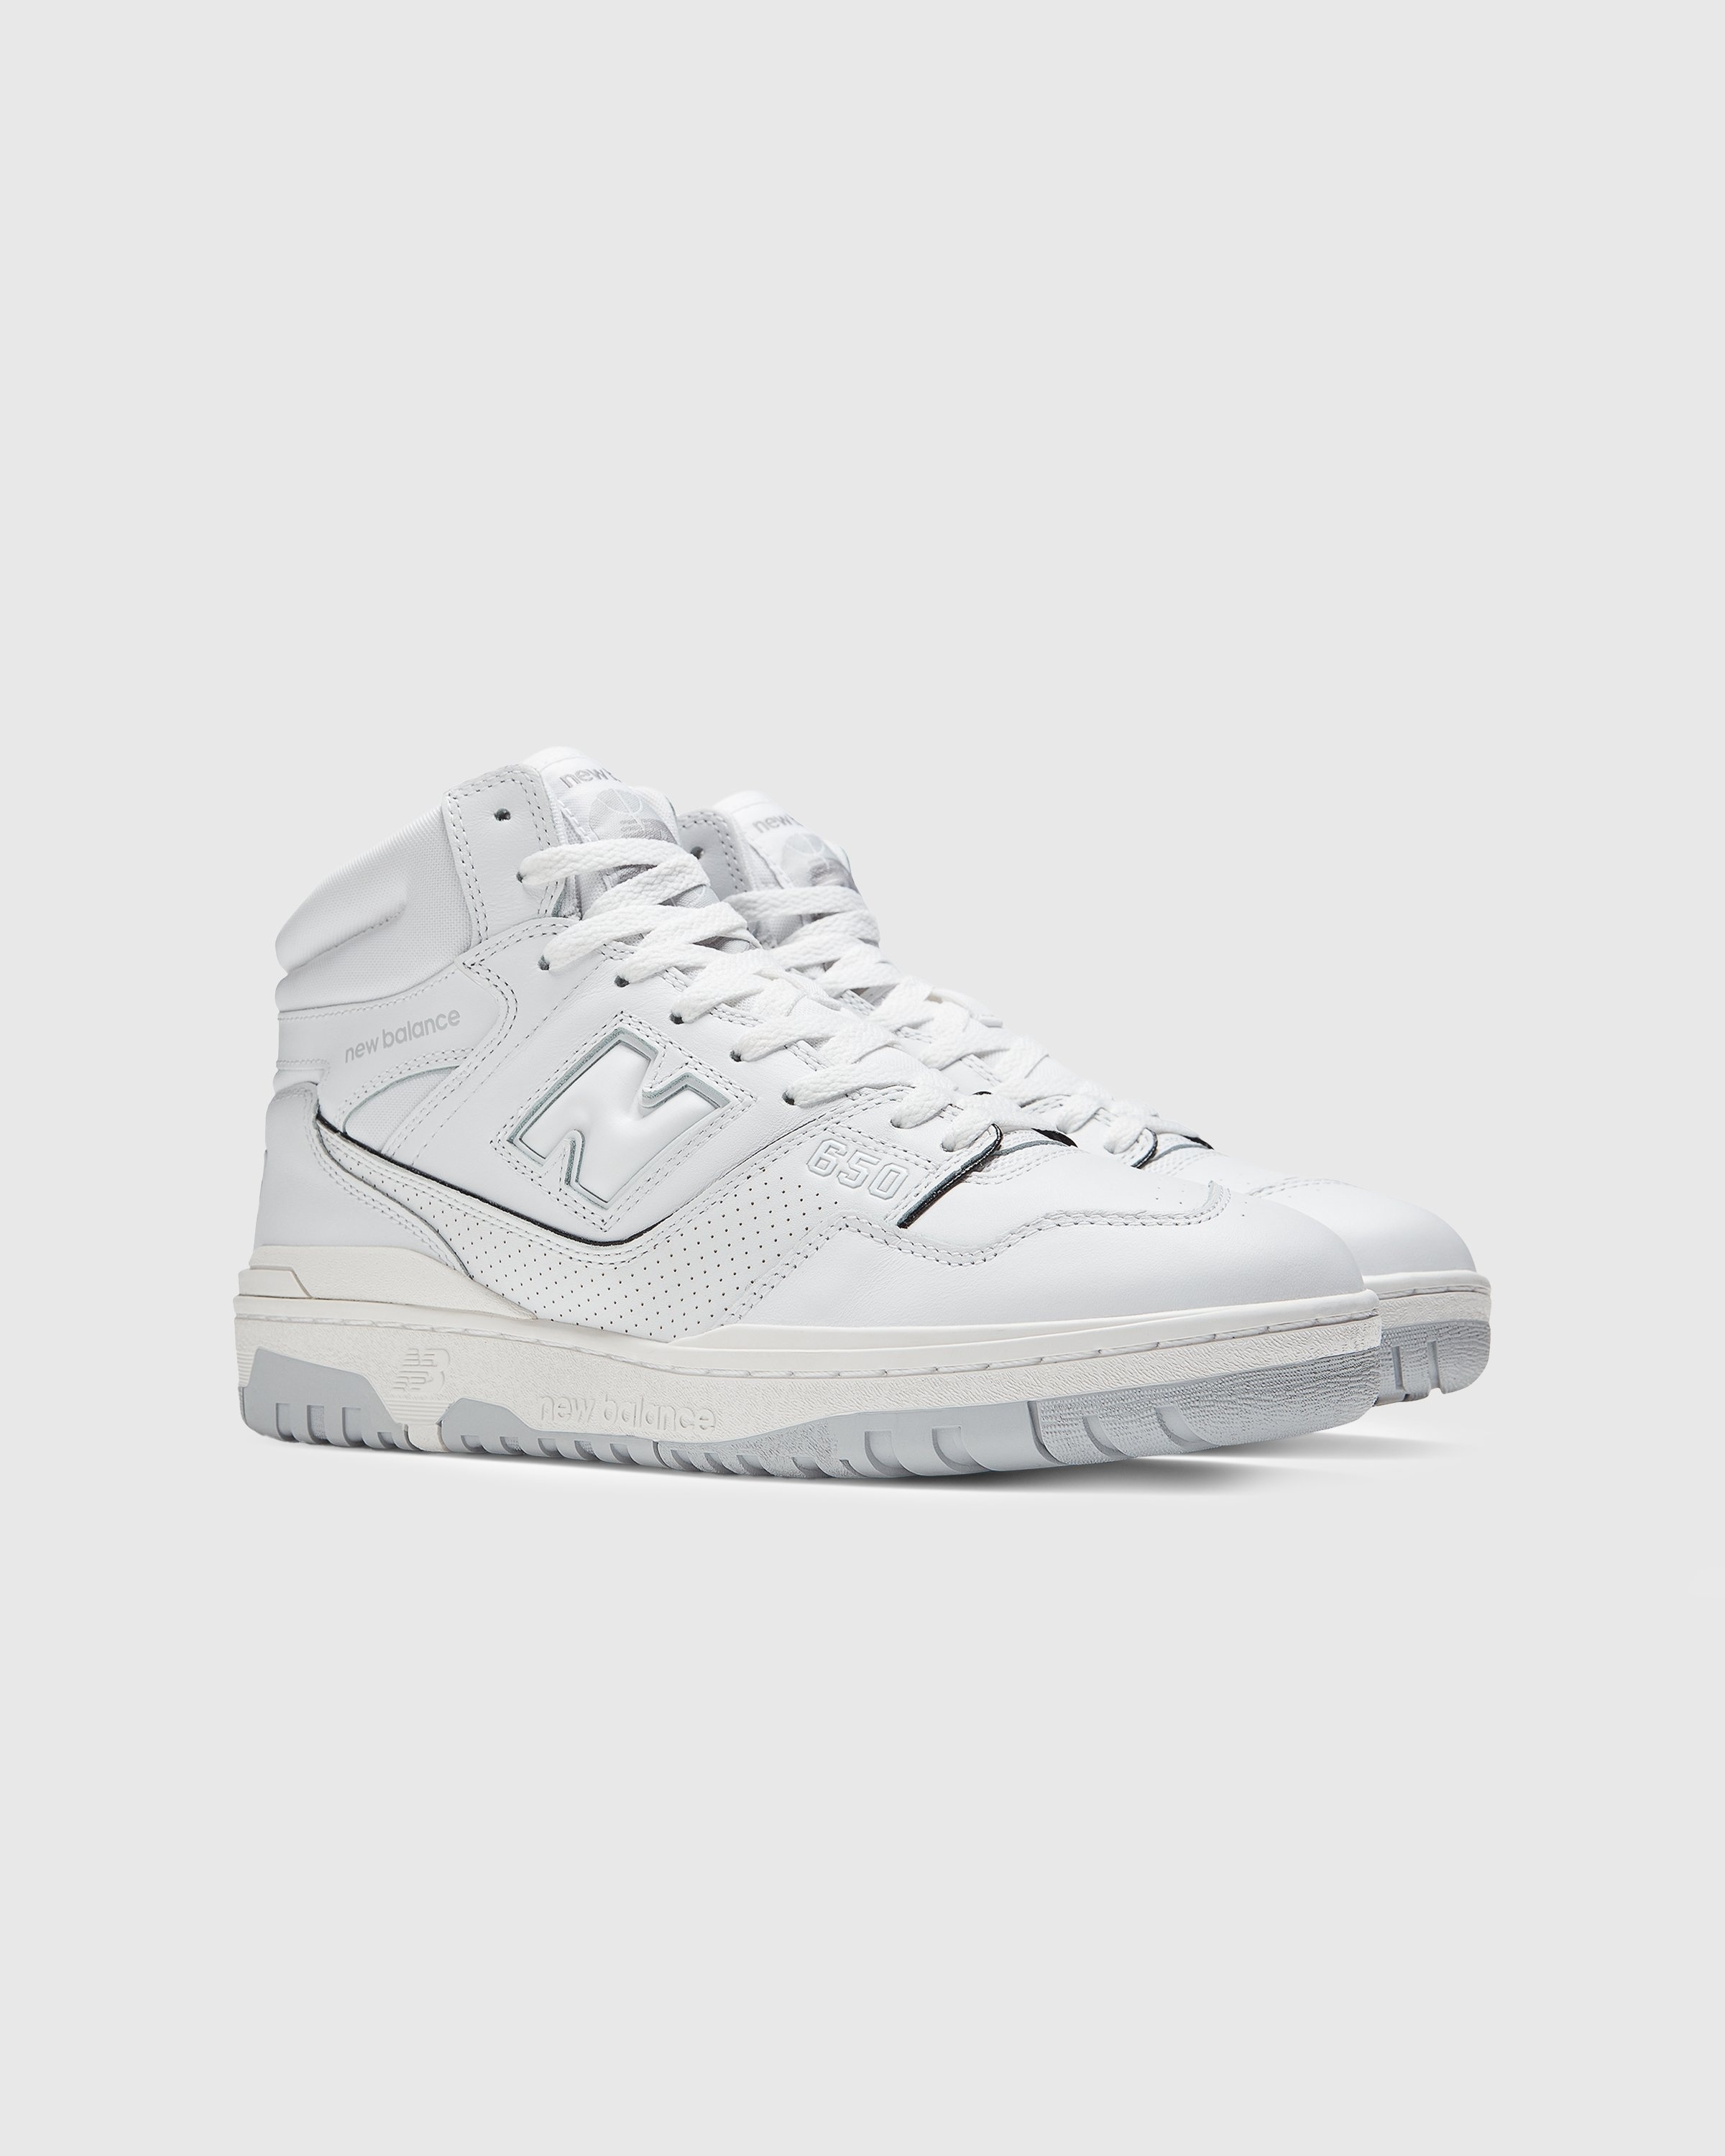 New Balance – BB 650 RWW White  - High Top Sneakers - White - Image 3